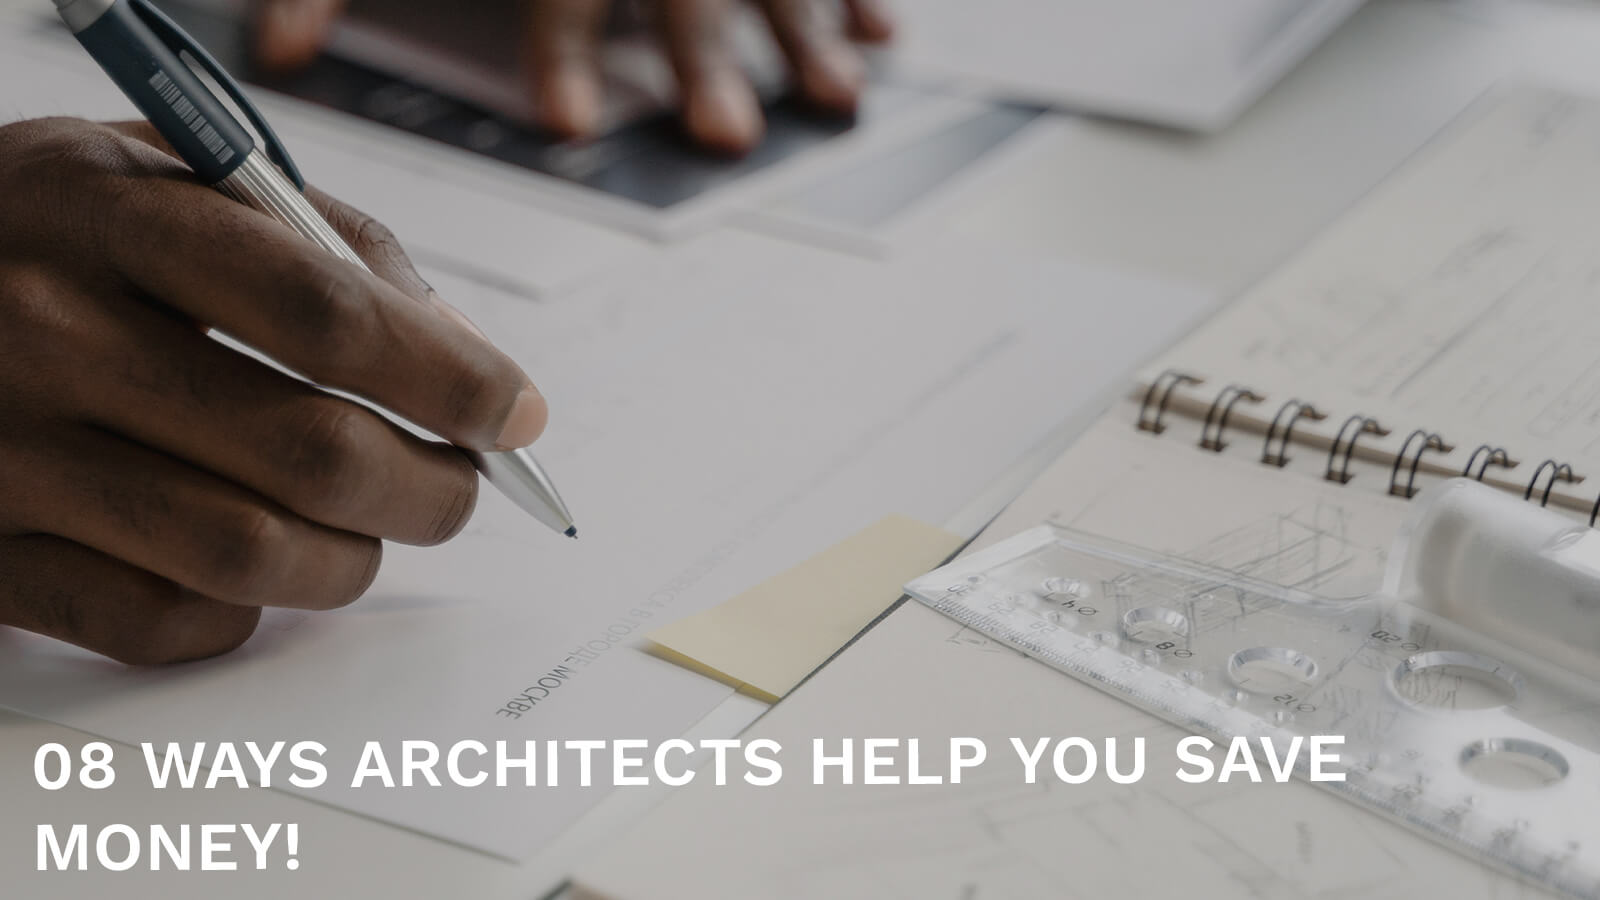 Architects Calculate and plan to help you save money.